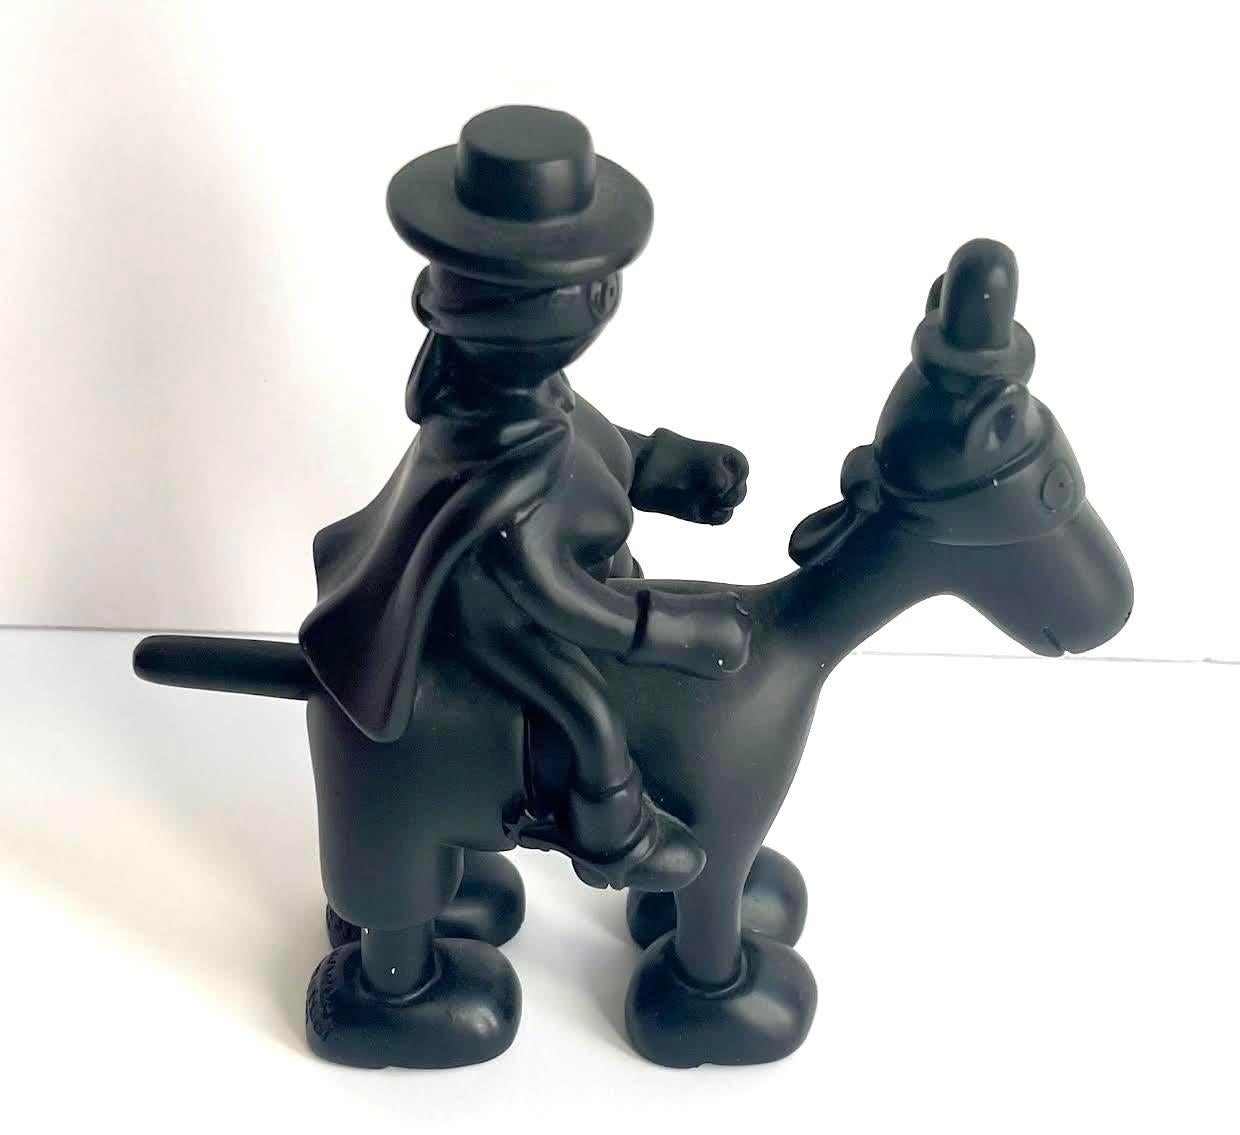 Tom Otterness
Horse and Rider Maquette, 2003
Black Resin Sculpture held in original box
5 1/2 × 3 1/2 × 2 inches
Held in original vintage box
This rare, highly collectible, limited edition uncommon 2003 Horse and Rider black resin maquette is a